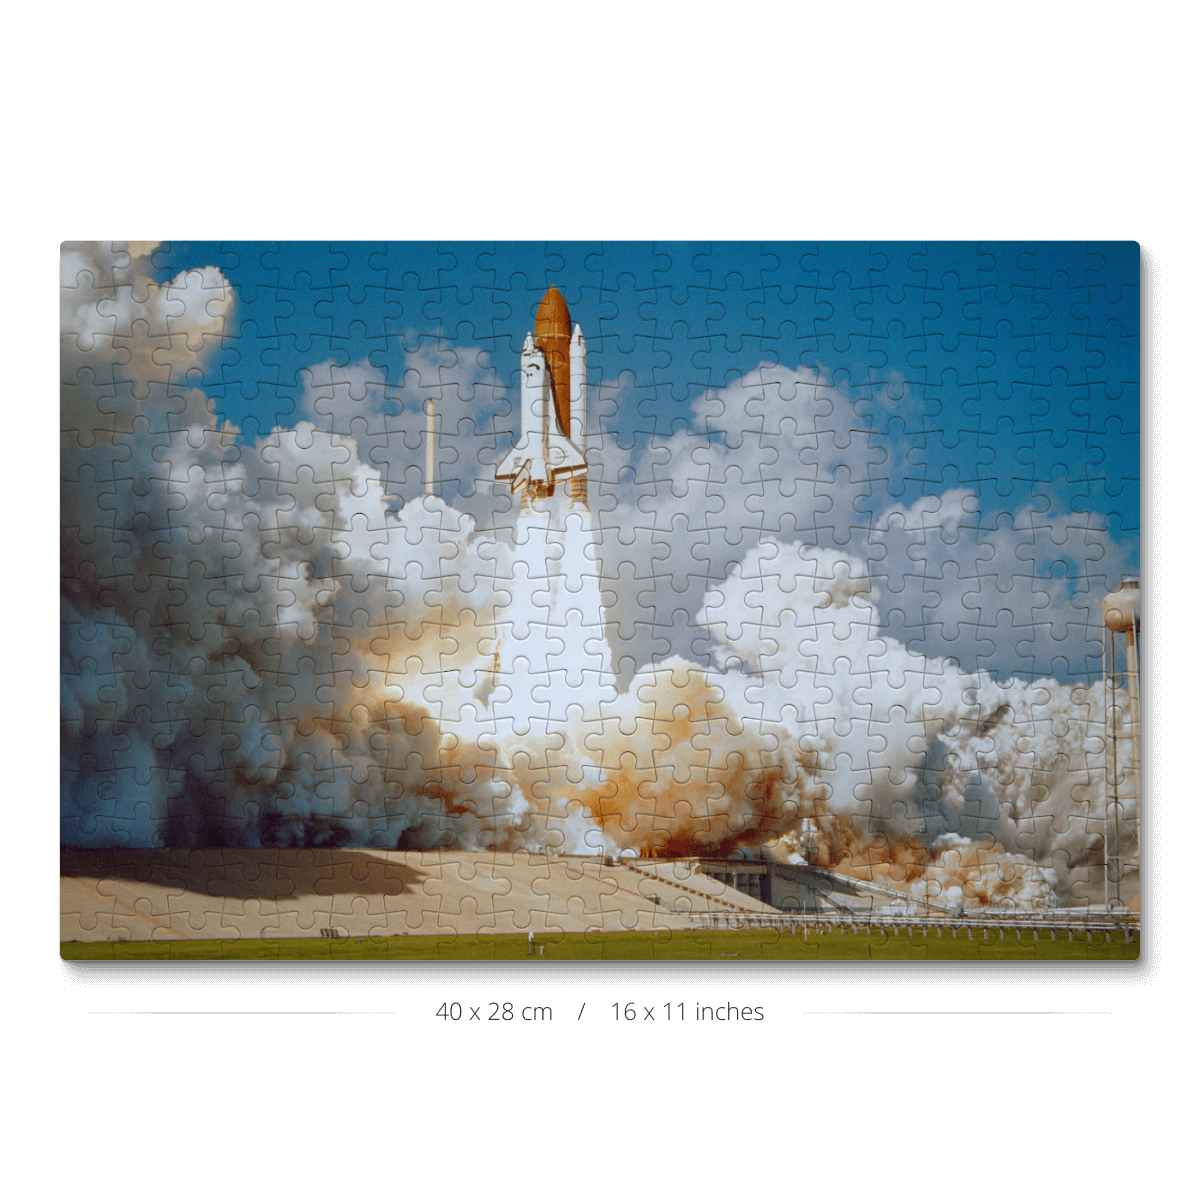 NASA space shuttle liftoff depicted on a 300 piece jigsaw puzzle.